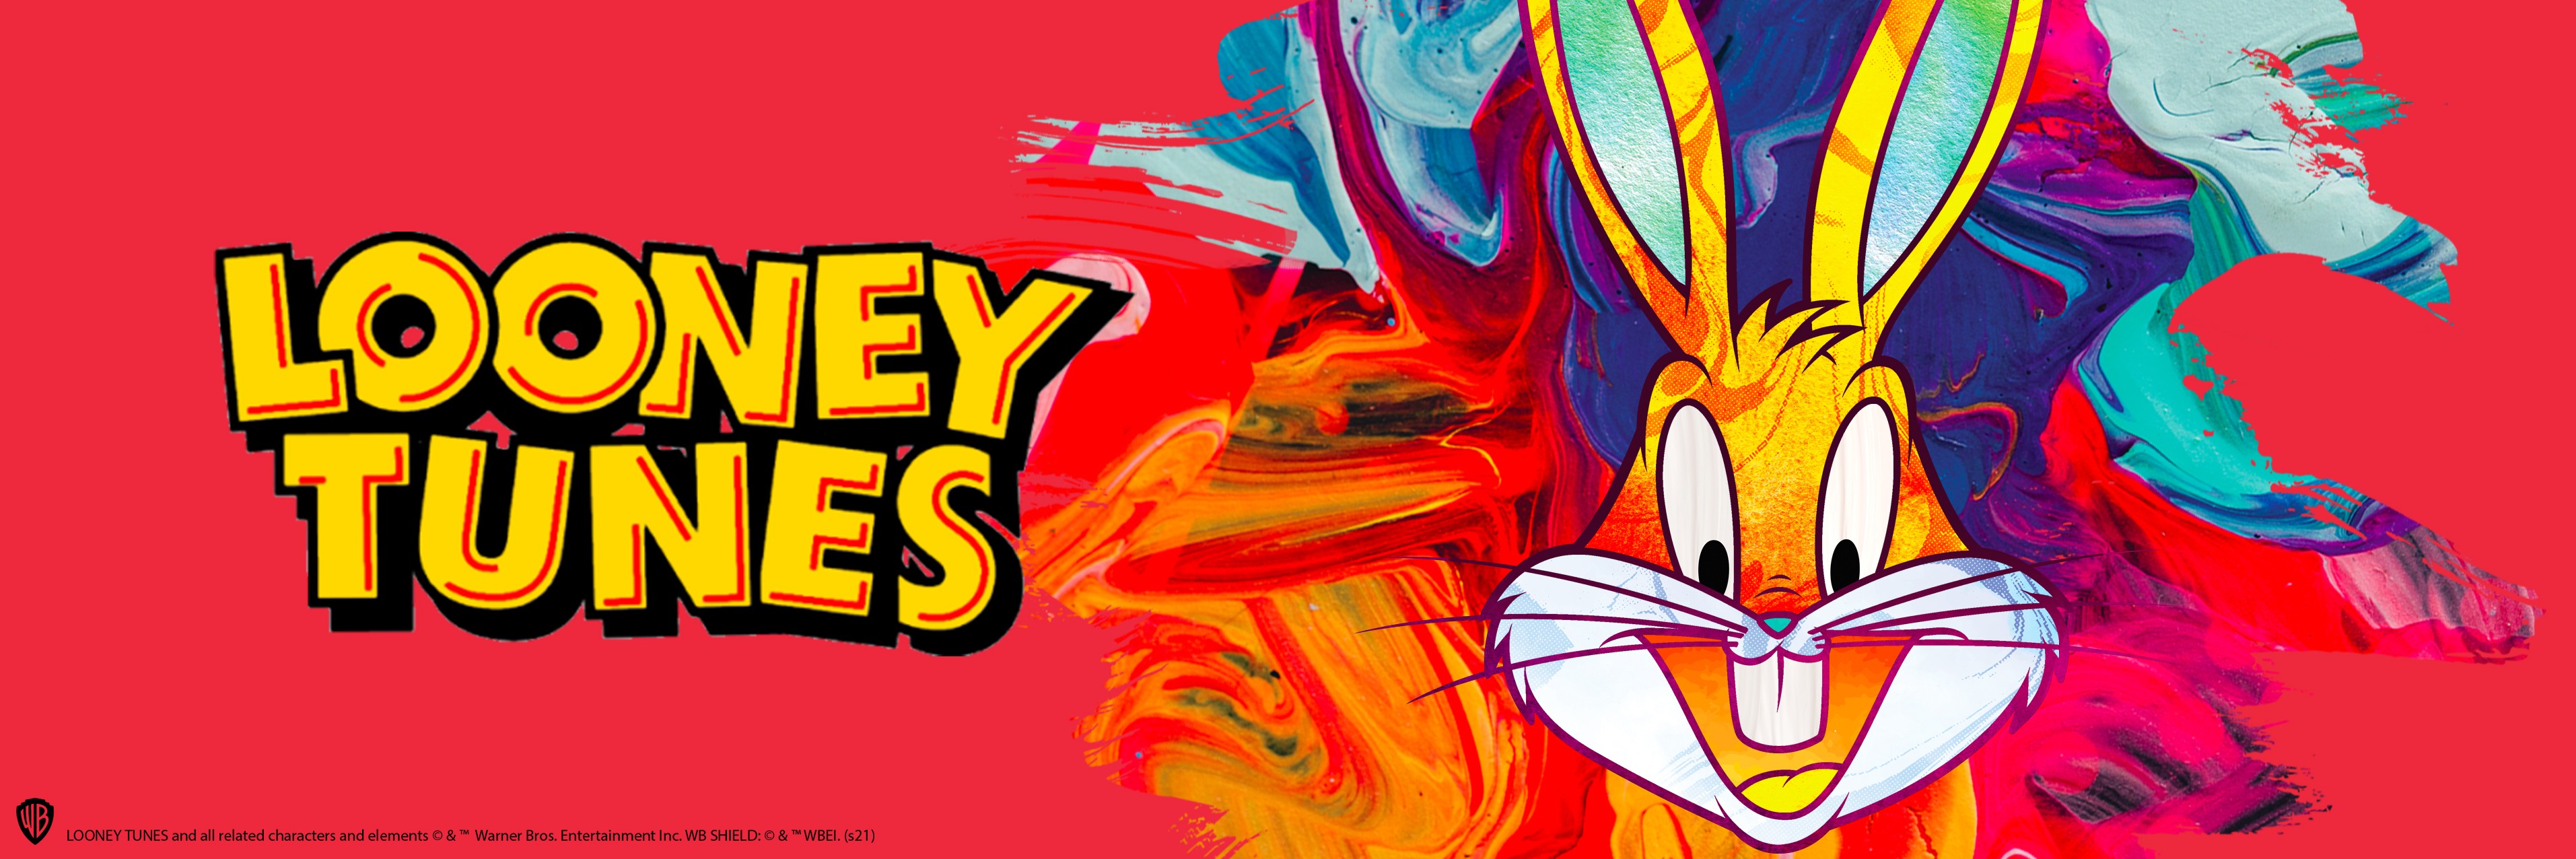 Looney Tunes Posters & Wall Art Prints